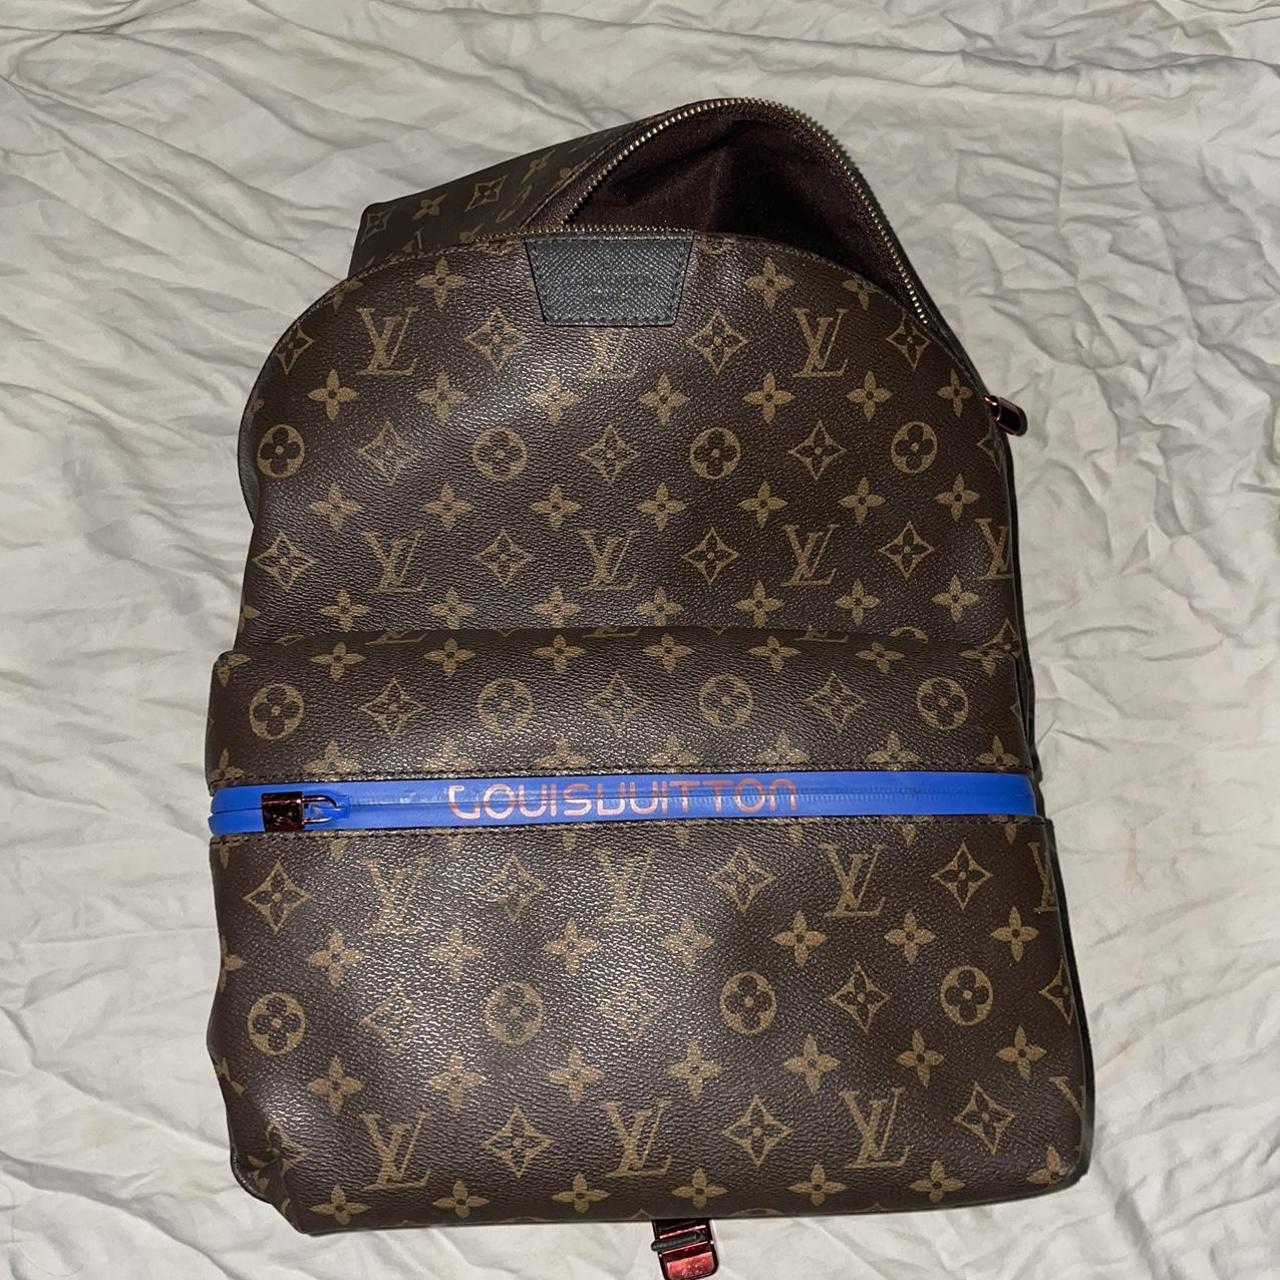 louis vuitton backpack sizes